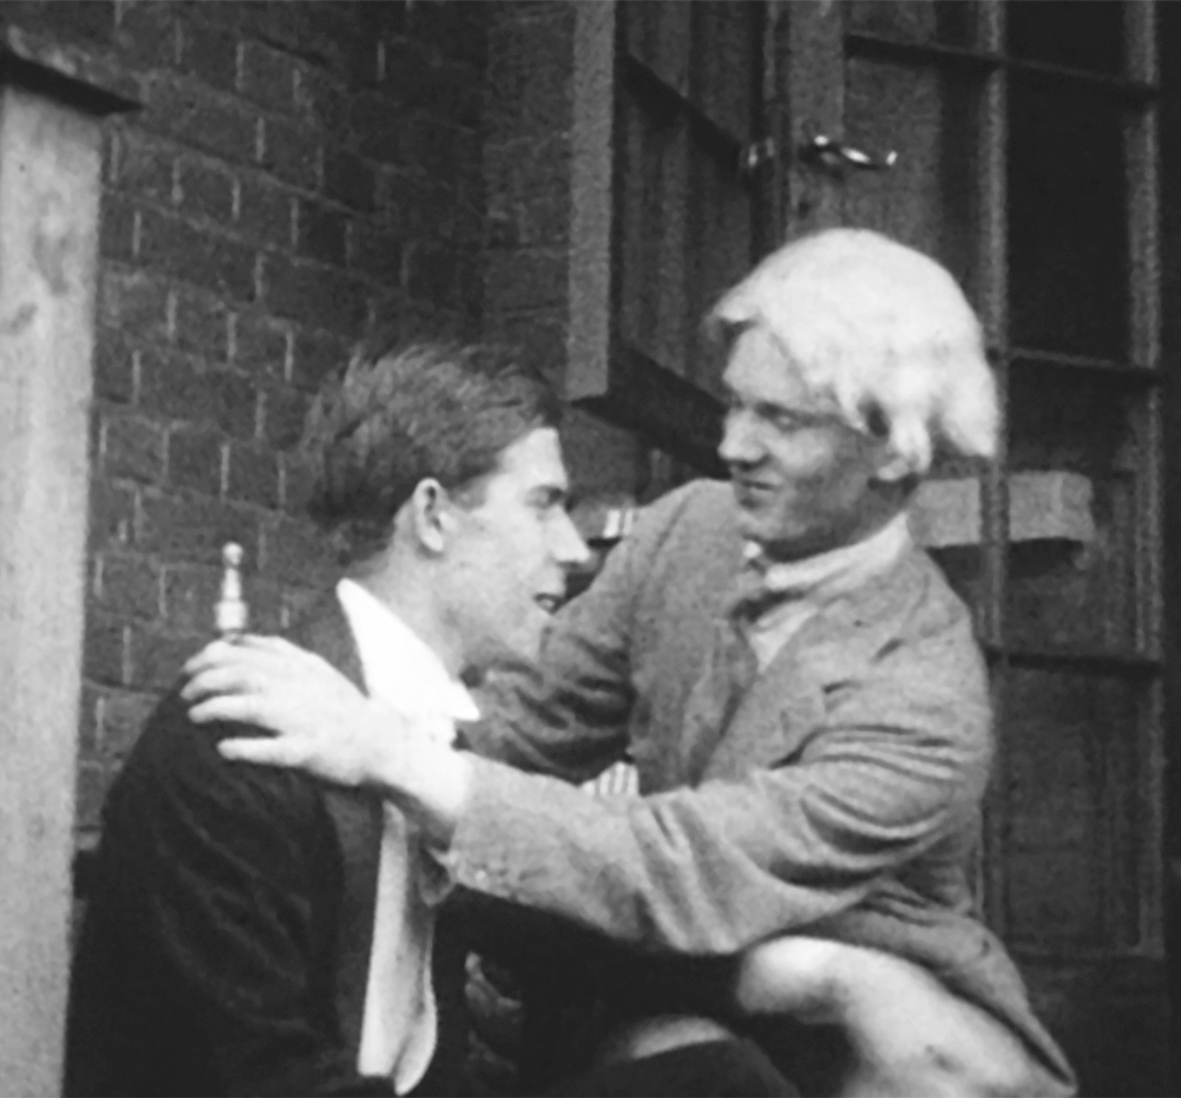 John Greenidge (left), Berkeley’s closest friend at Oxford, as the Prince of Wales, and Evelyn Waugh as the Dean of Balliol, in The Scarlet Woman, 1925 (British Film Institute).